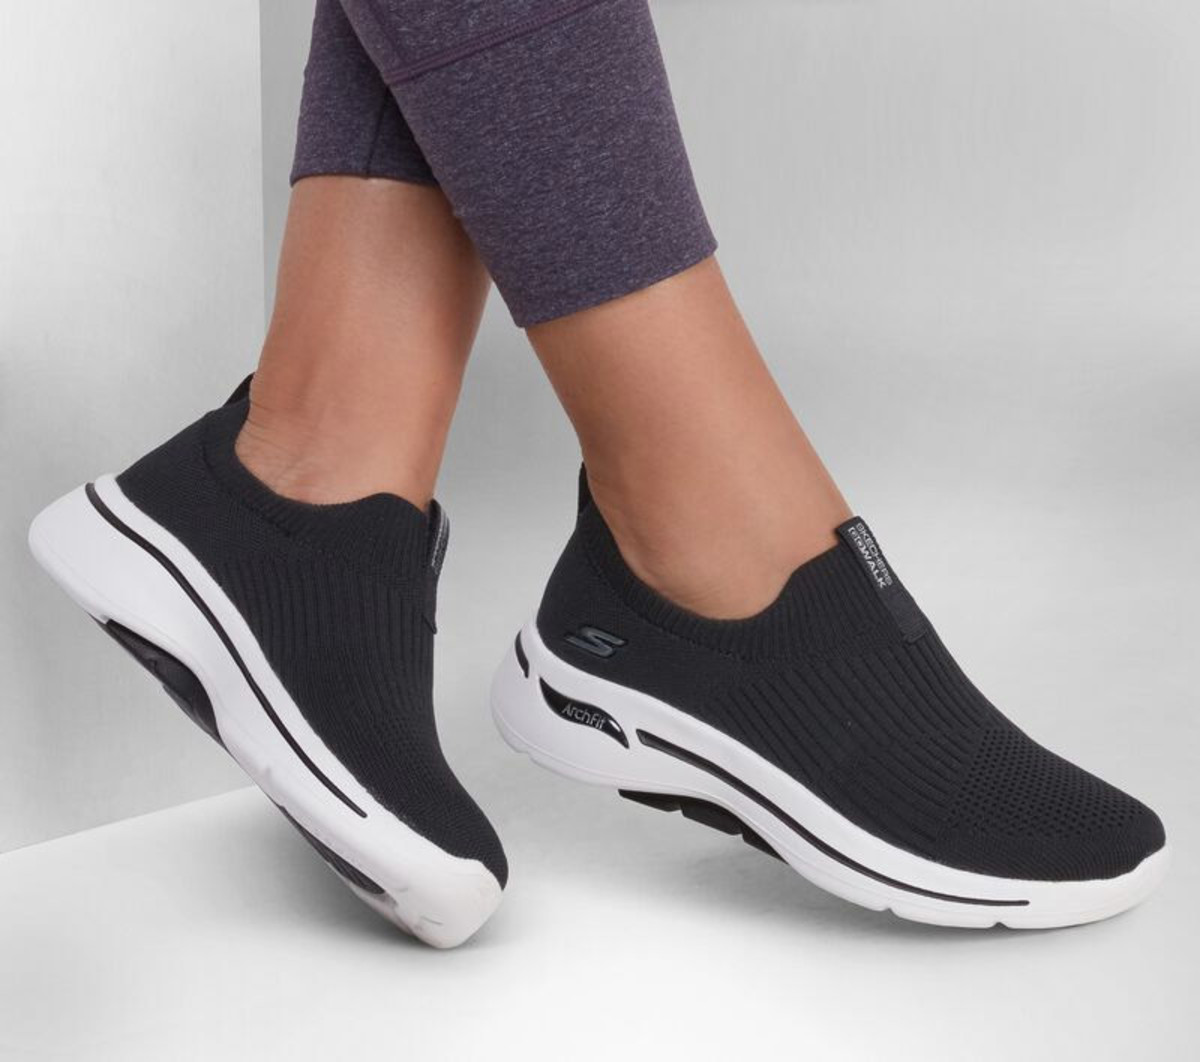 Skechers GoWalk Arch Fit-Iconic sneakers, the style Martha Stewart wears for the campaign